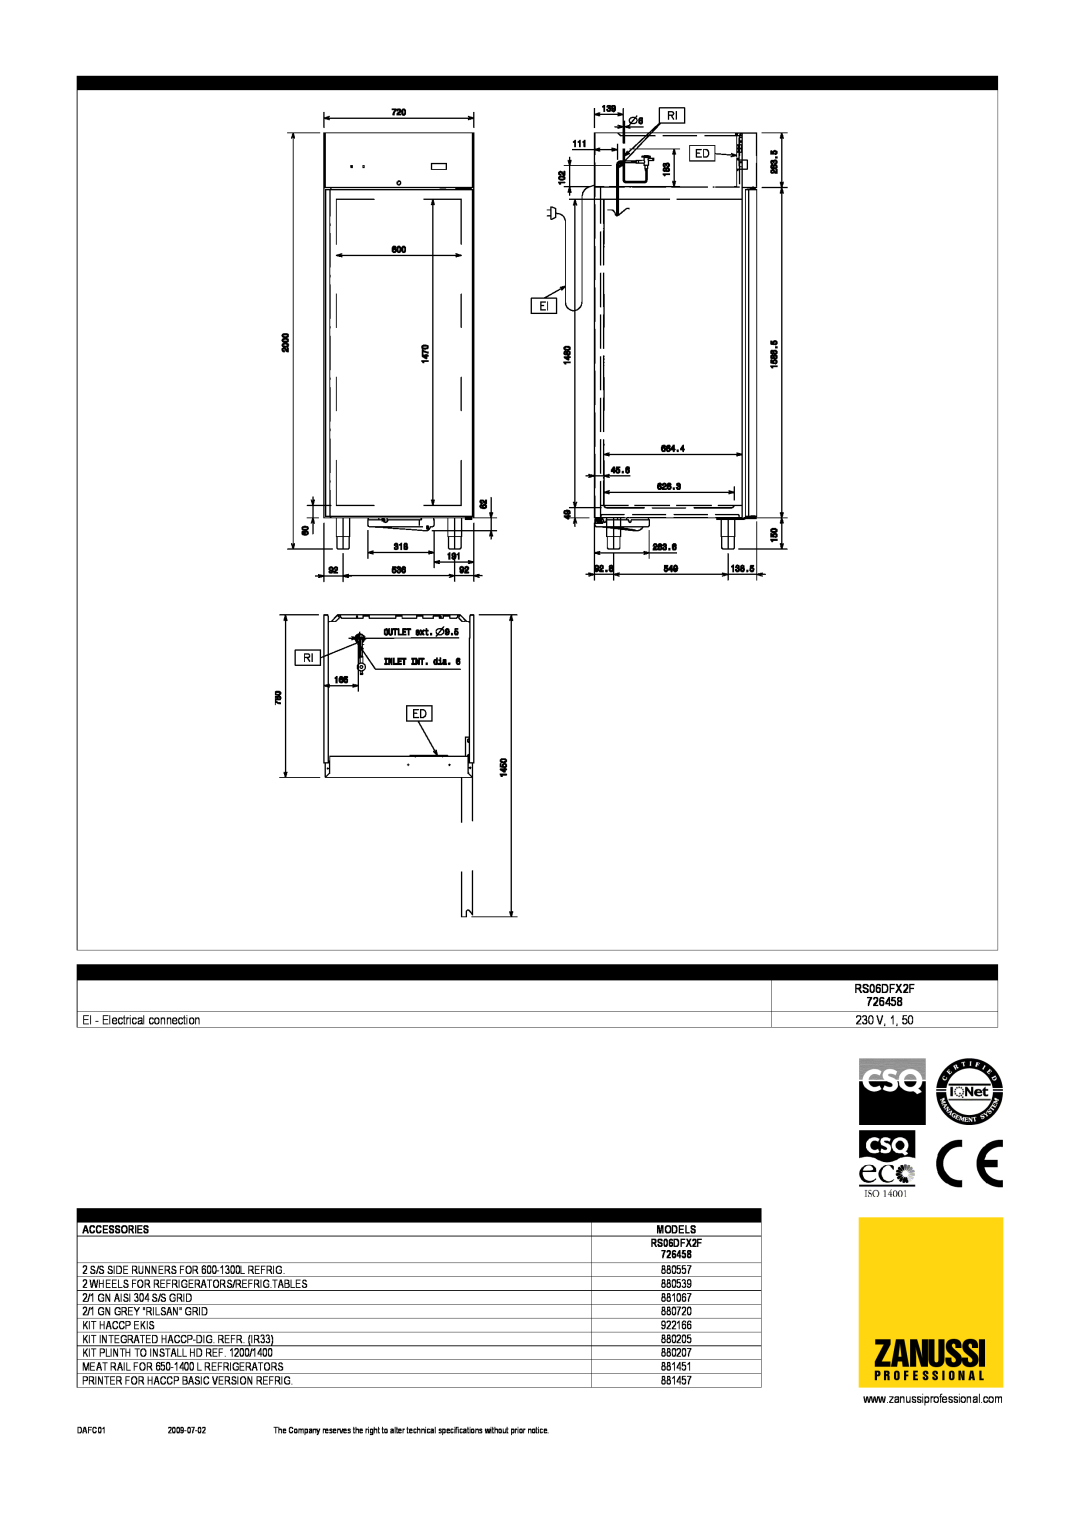 Electrolux dimensions Zanussi, EI - Electrical connection, RS06DFX2F 726458, 230 V, 1, Optional Accessories, Models 